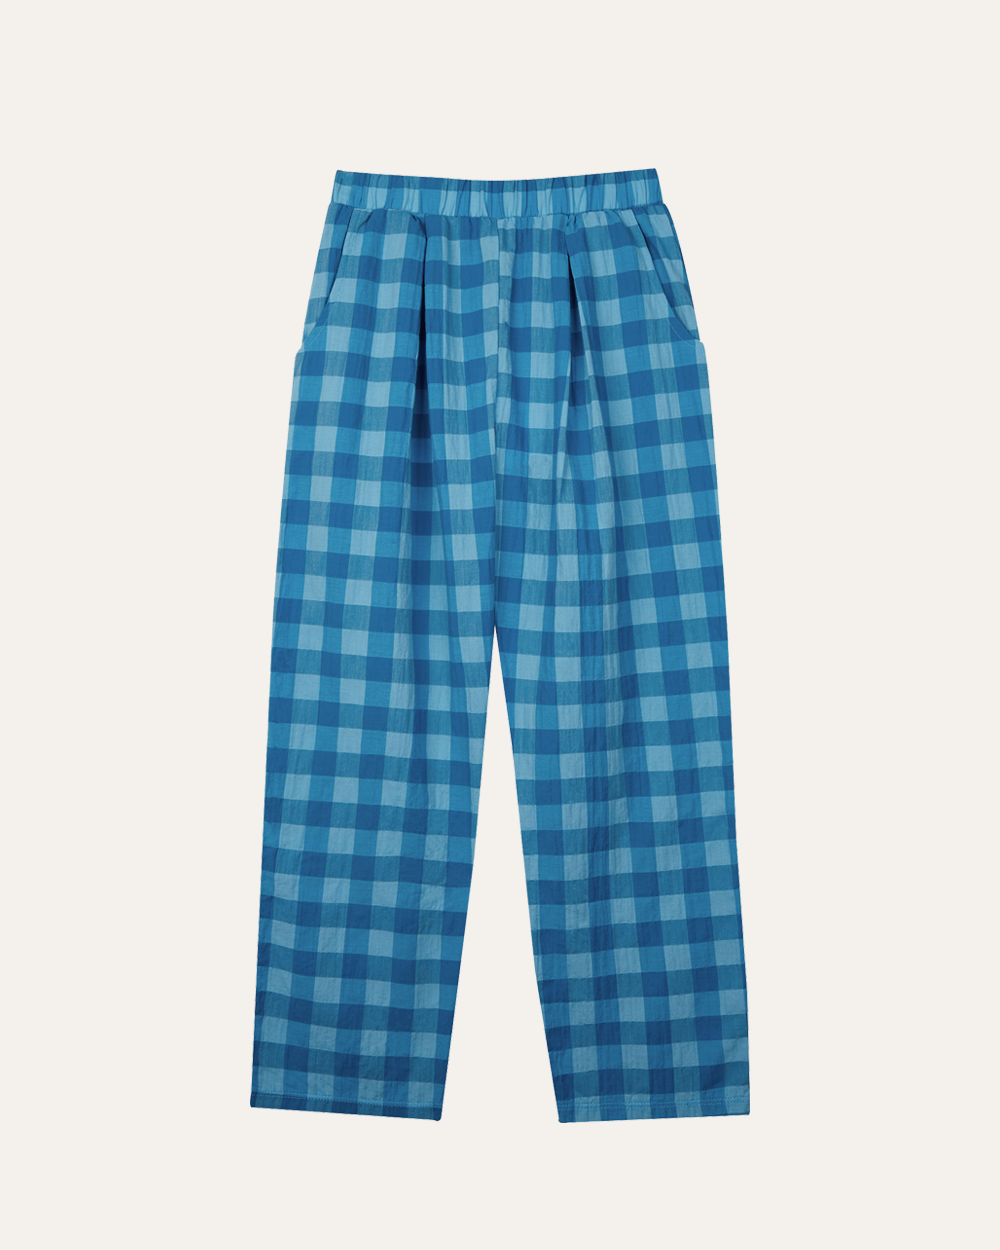 [ THE CAMPAMENTO ] BLUE CHECKED TROUSERS [7-8Y, 11-12Y]